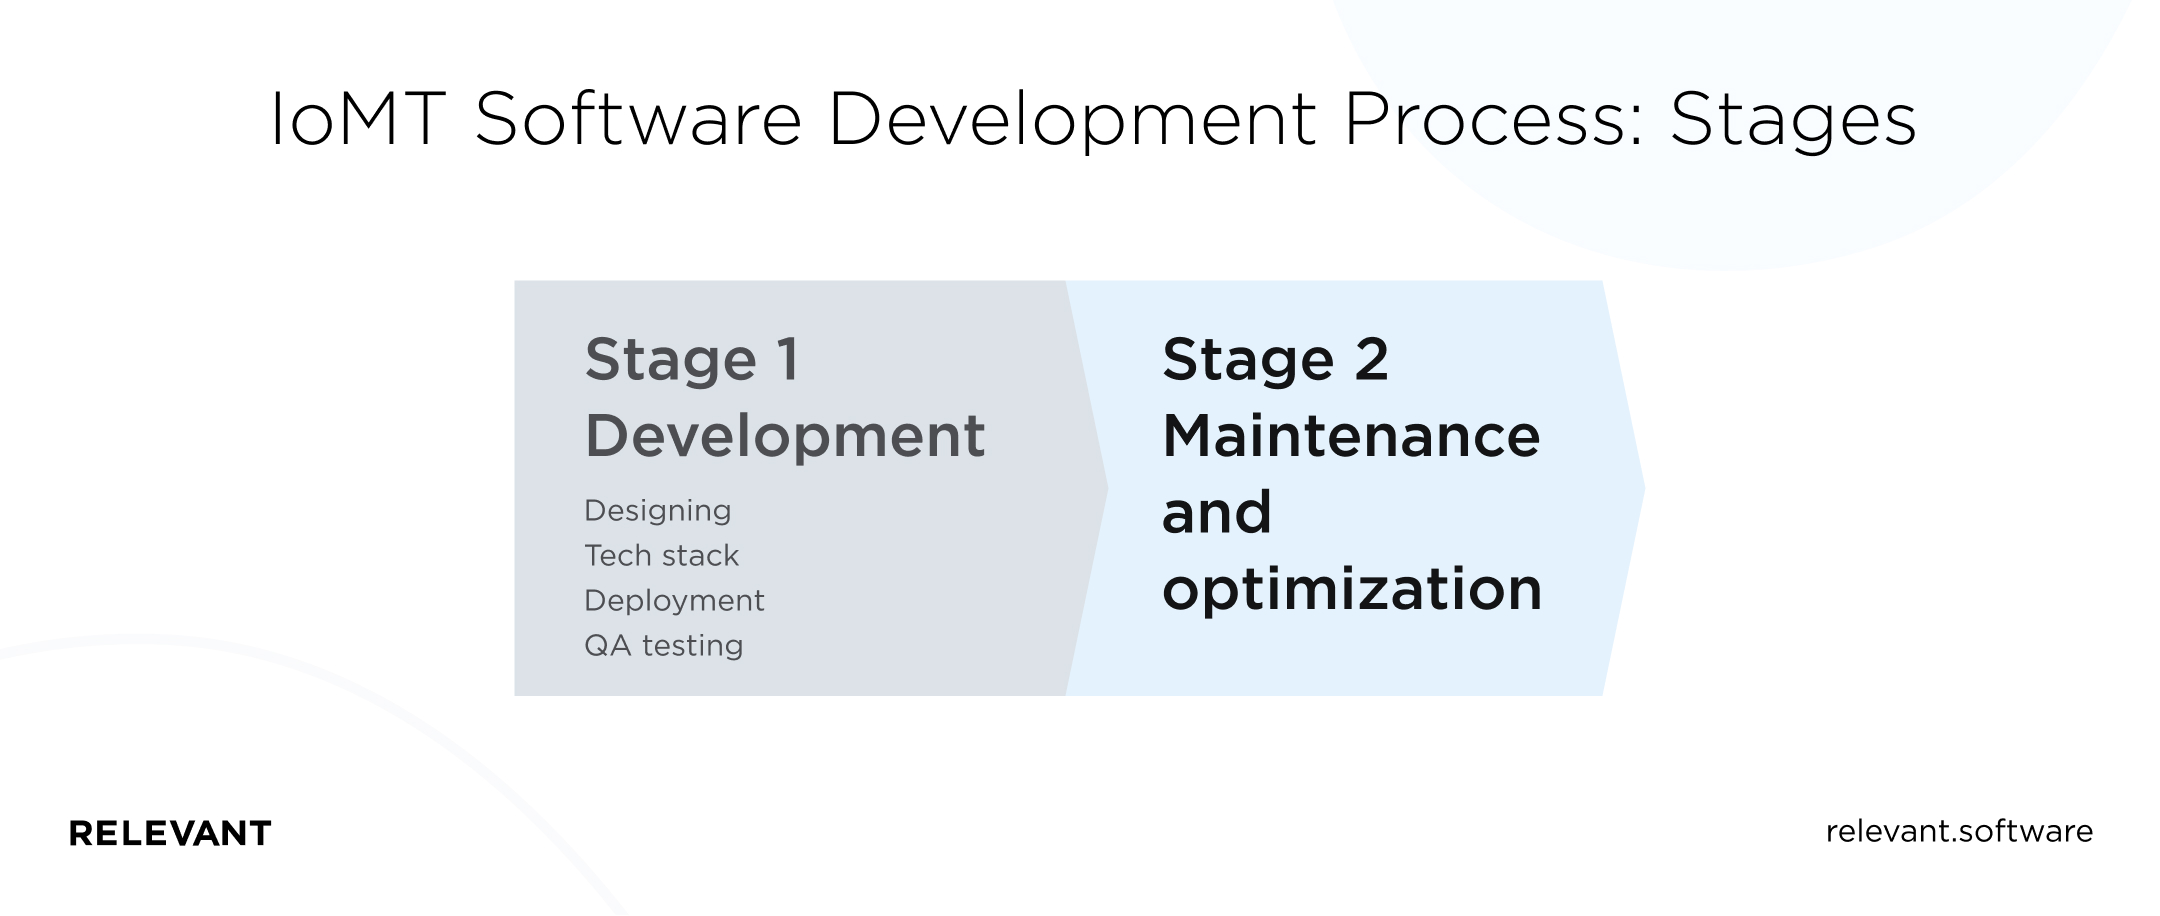 IoMT Software Development Process: Stages
